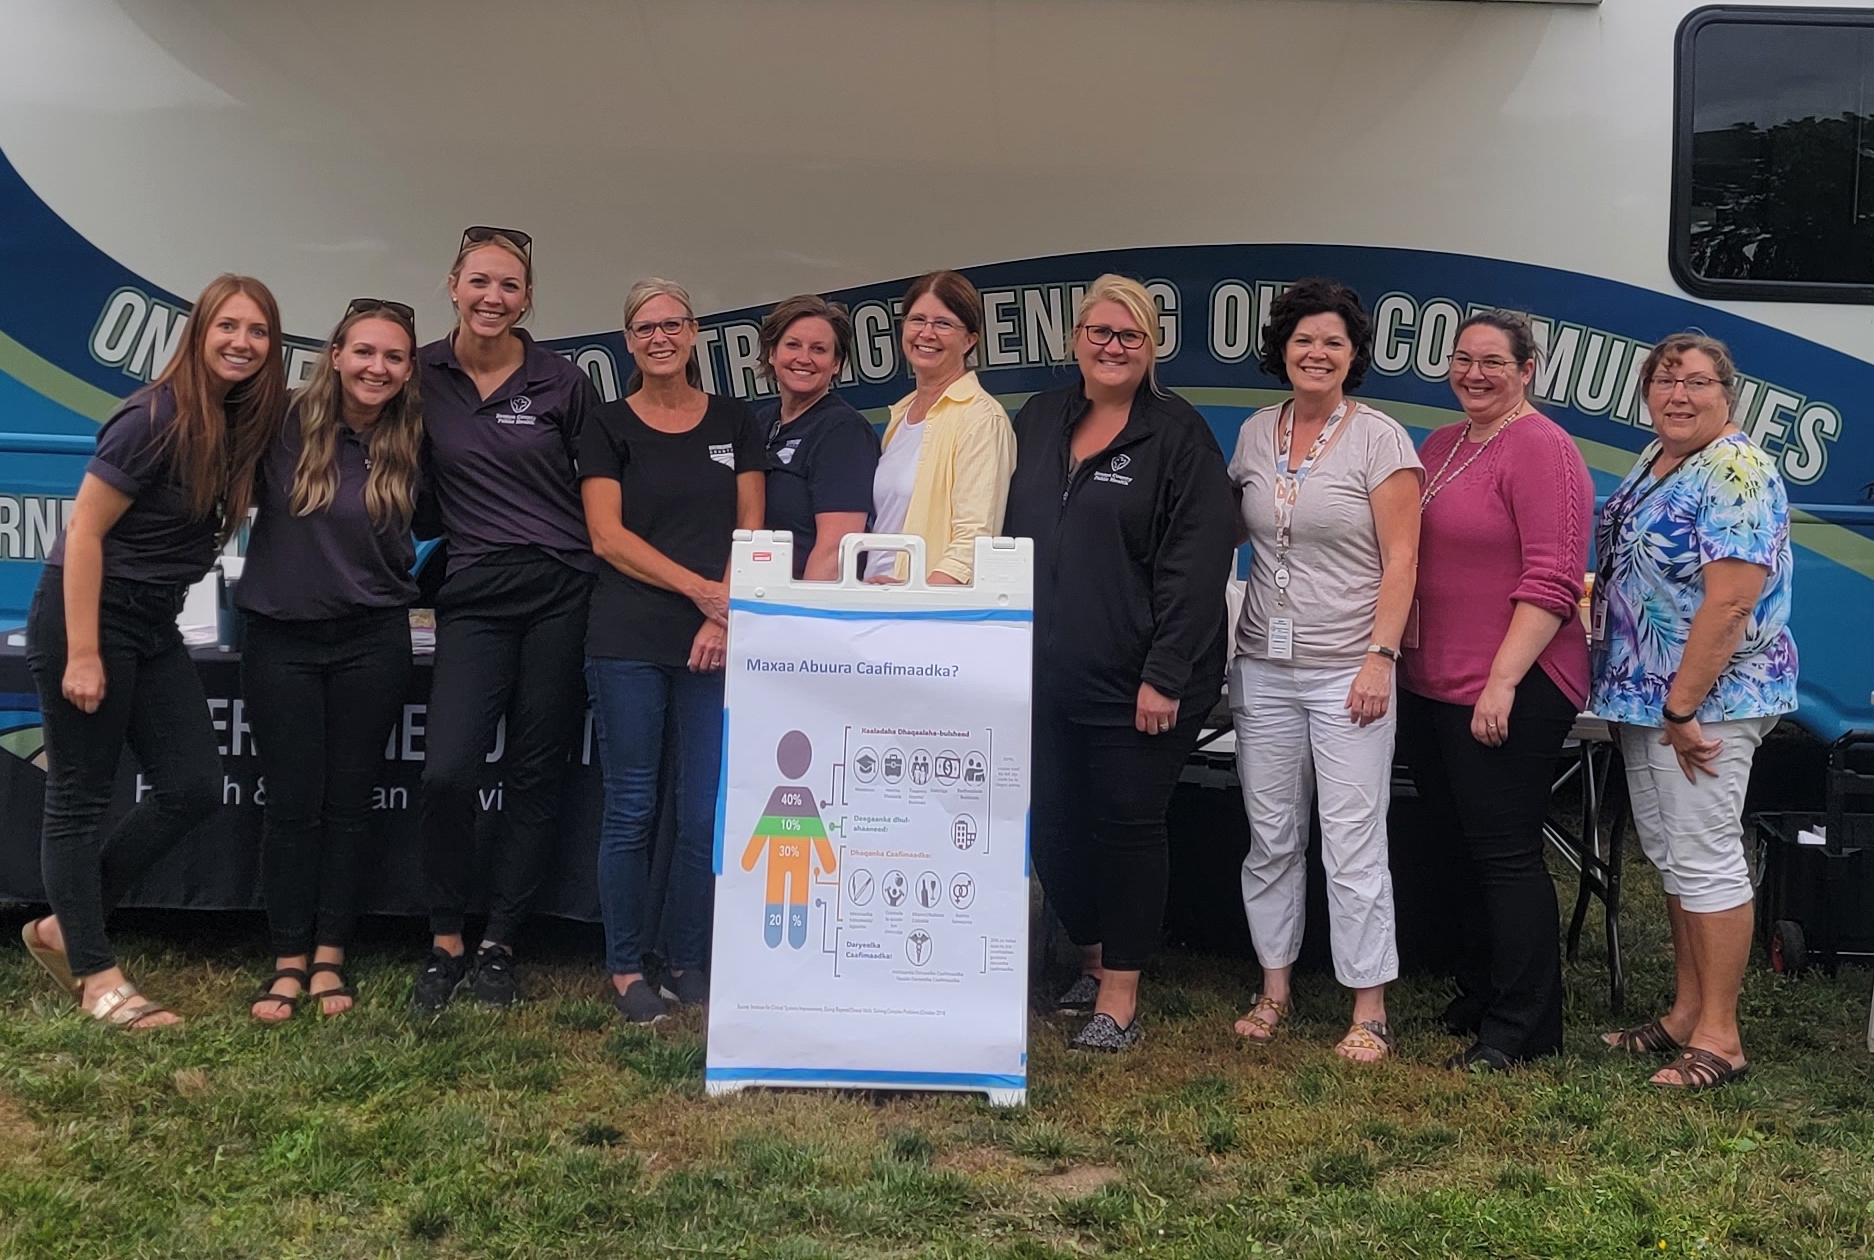 Photo of Health Festival in St Cloud, featuring 10 CMA Staff in front of the Sherburne County Wellness Bus.